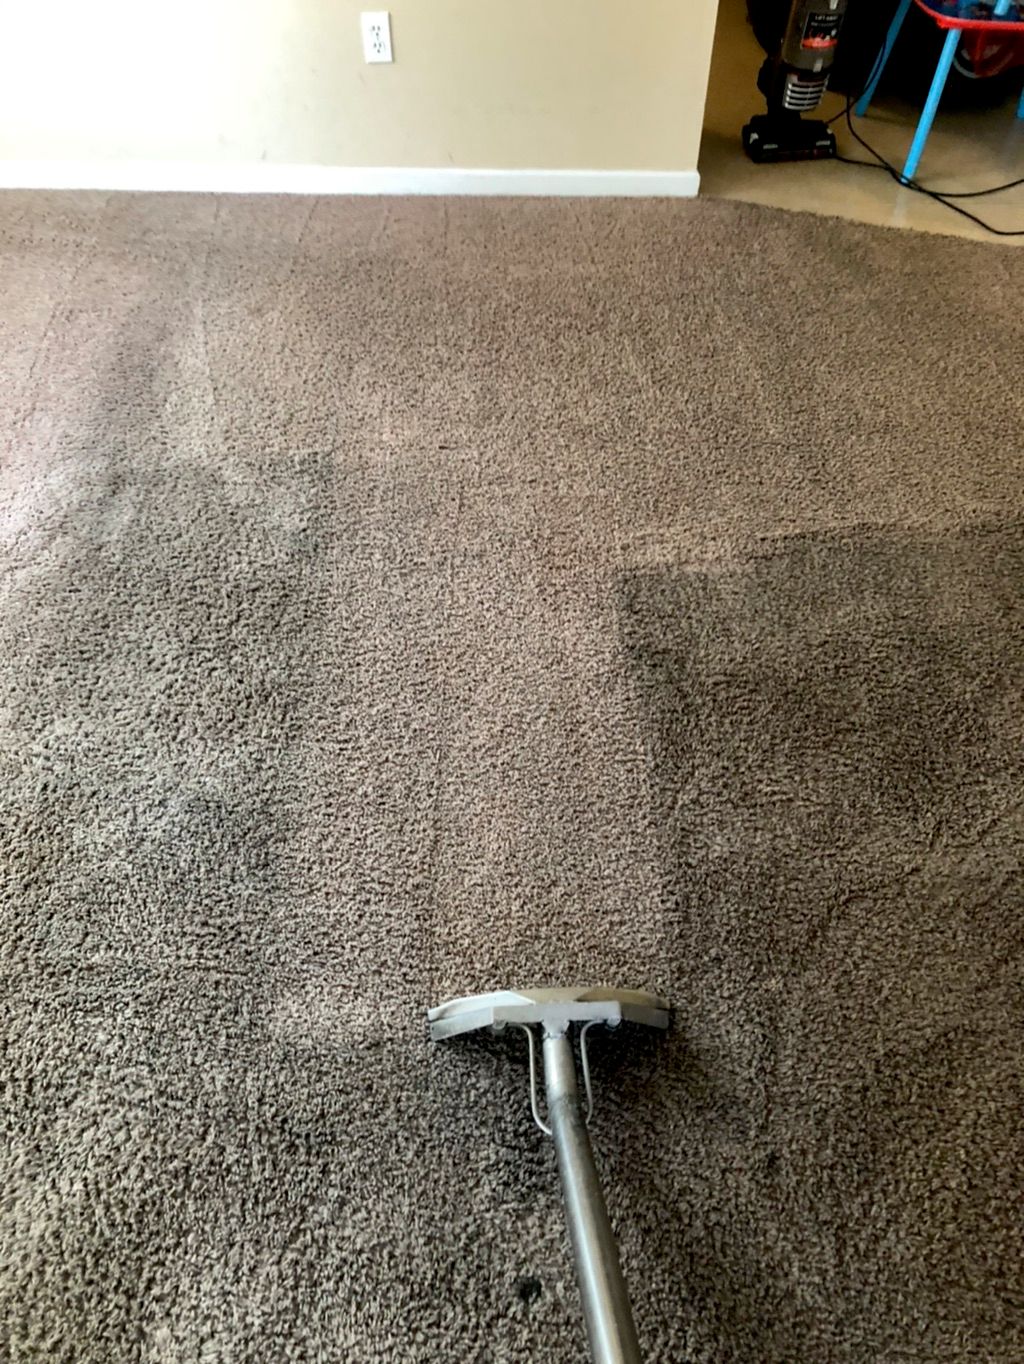 Exceptionally Clean Carpet